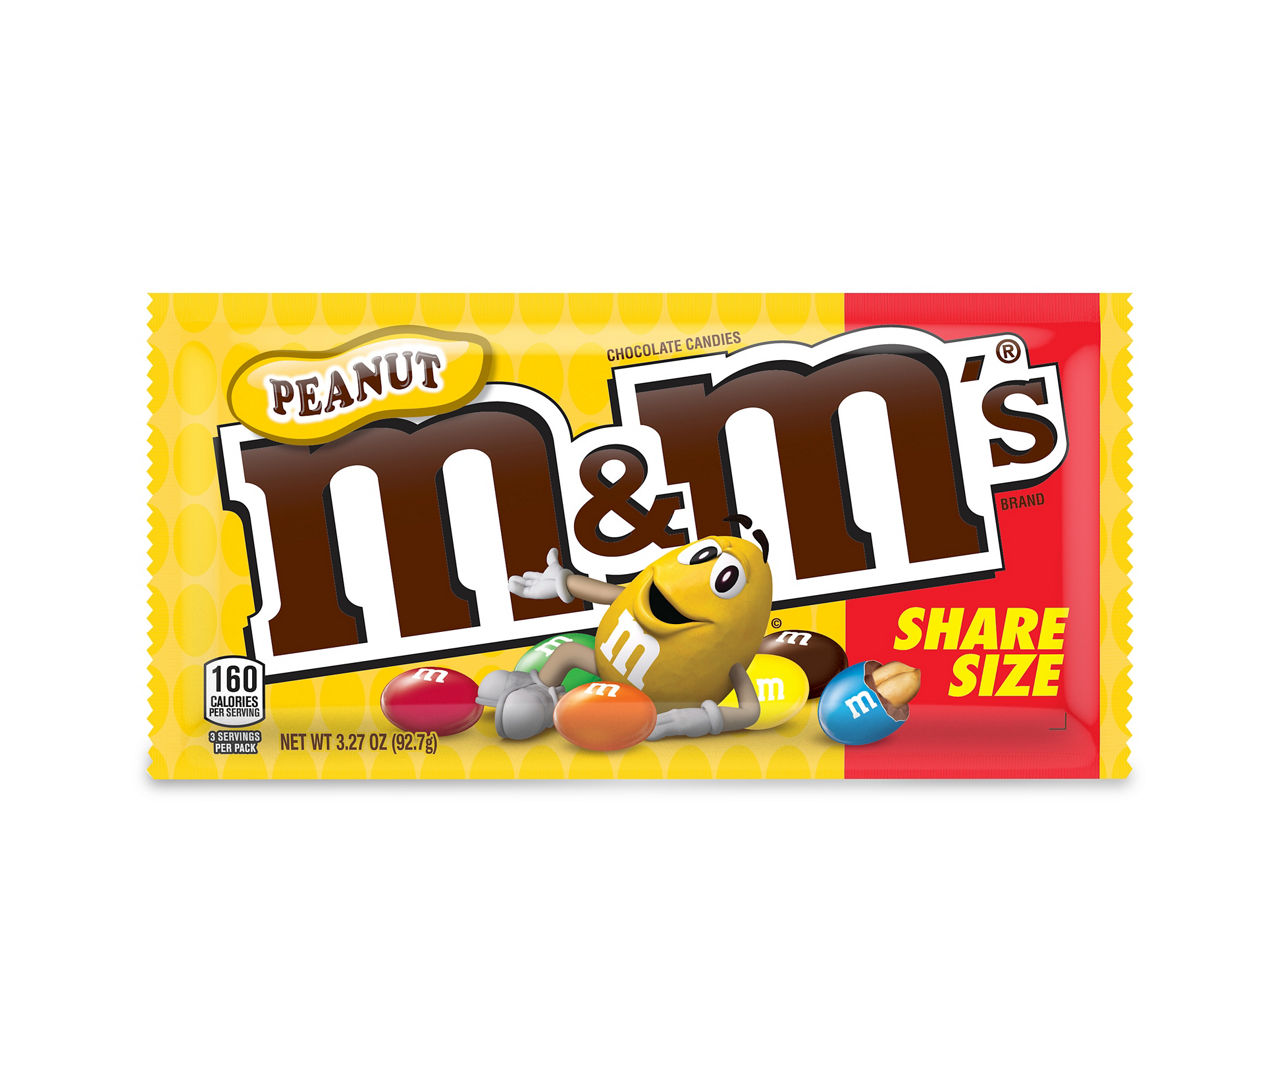 M&M'S Milk Chocolate Candy Sharing Size In Resealable Bag - 10 Oz